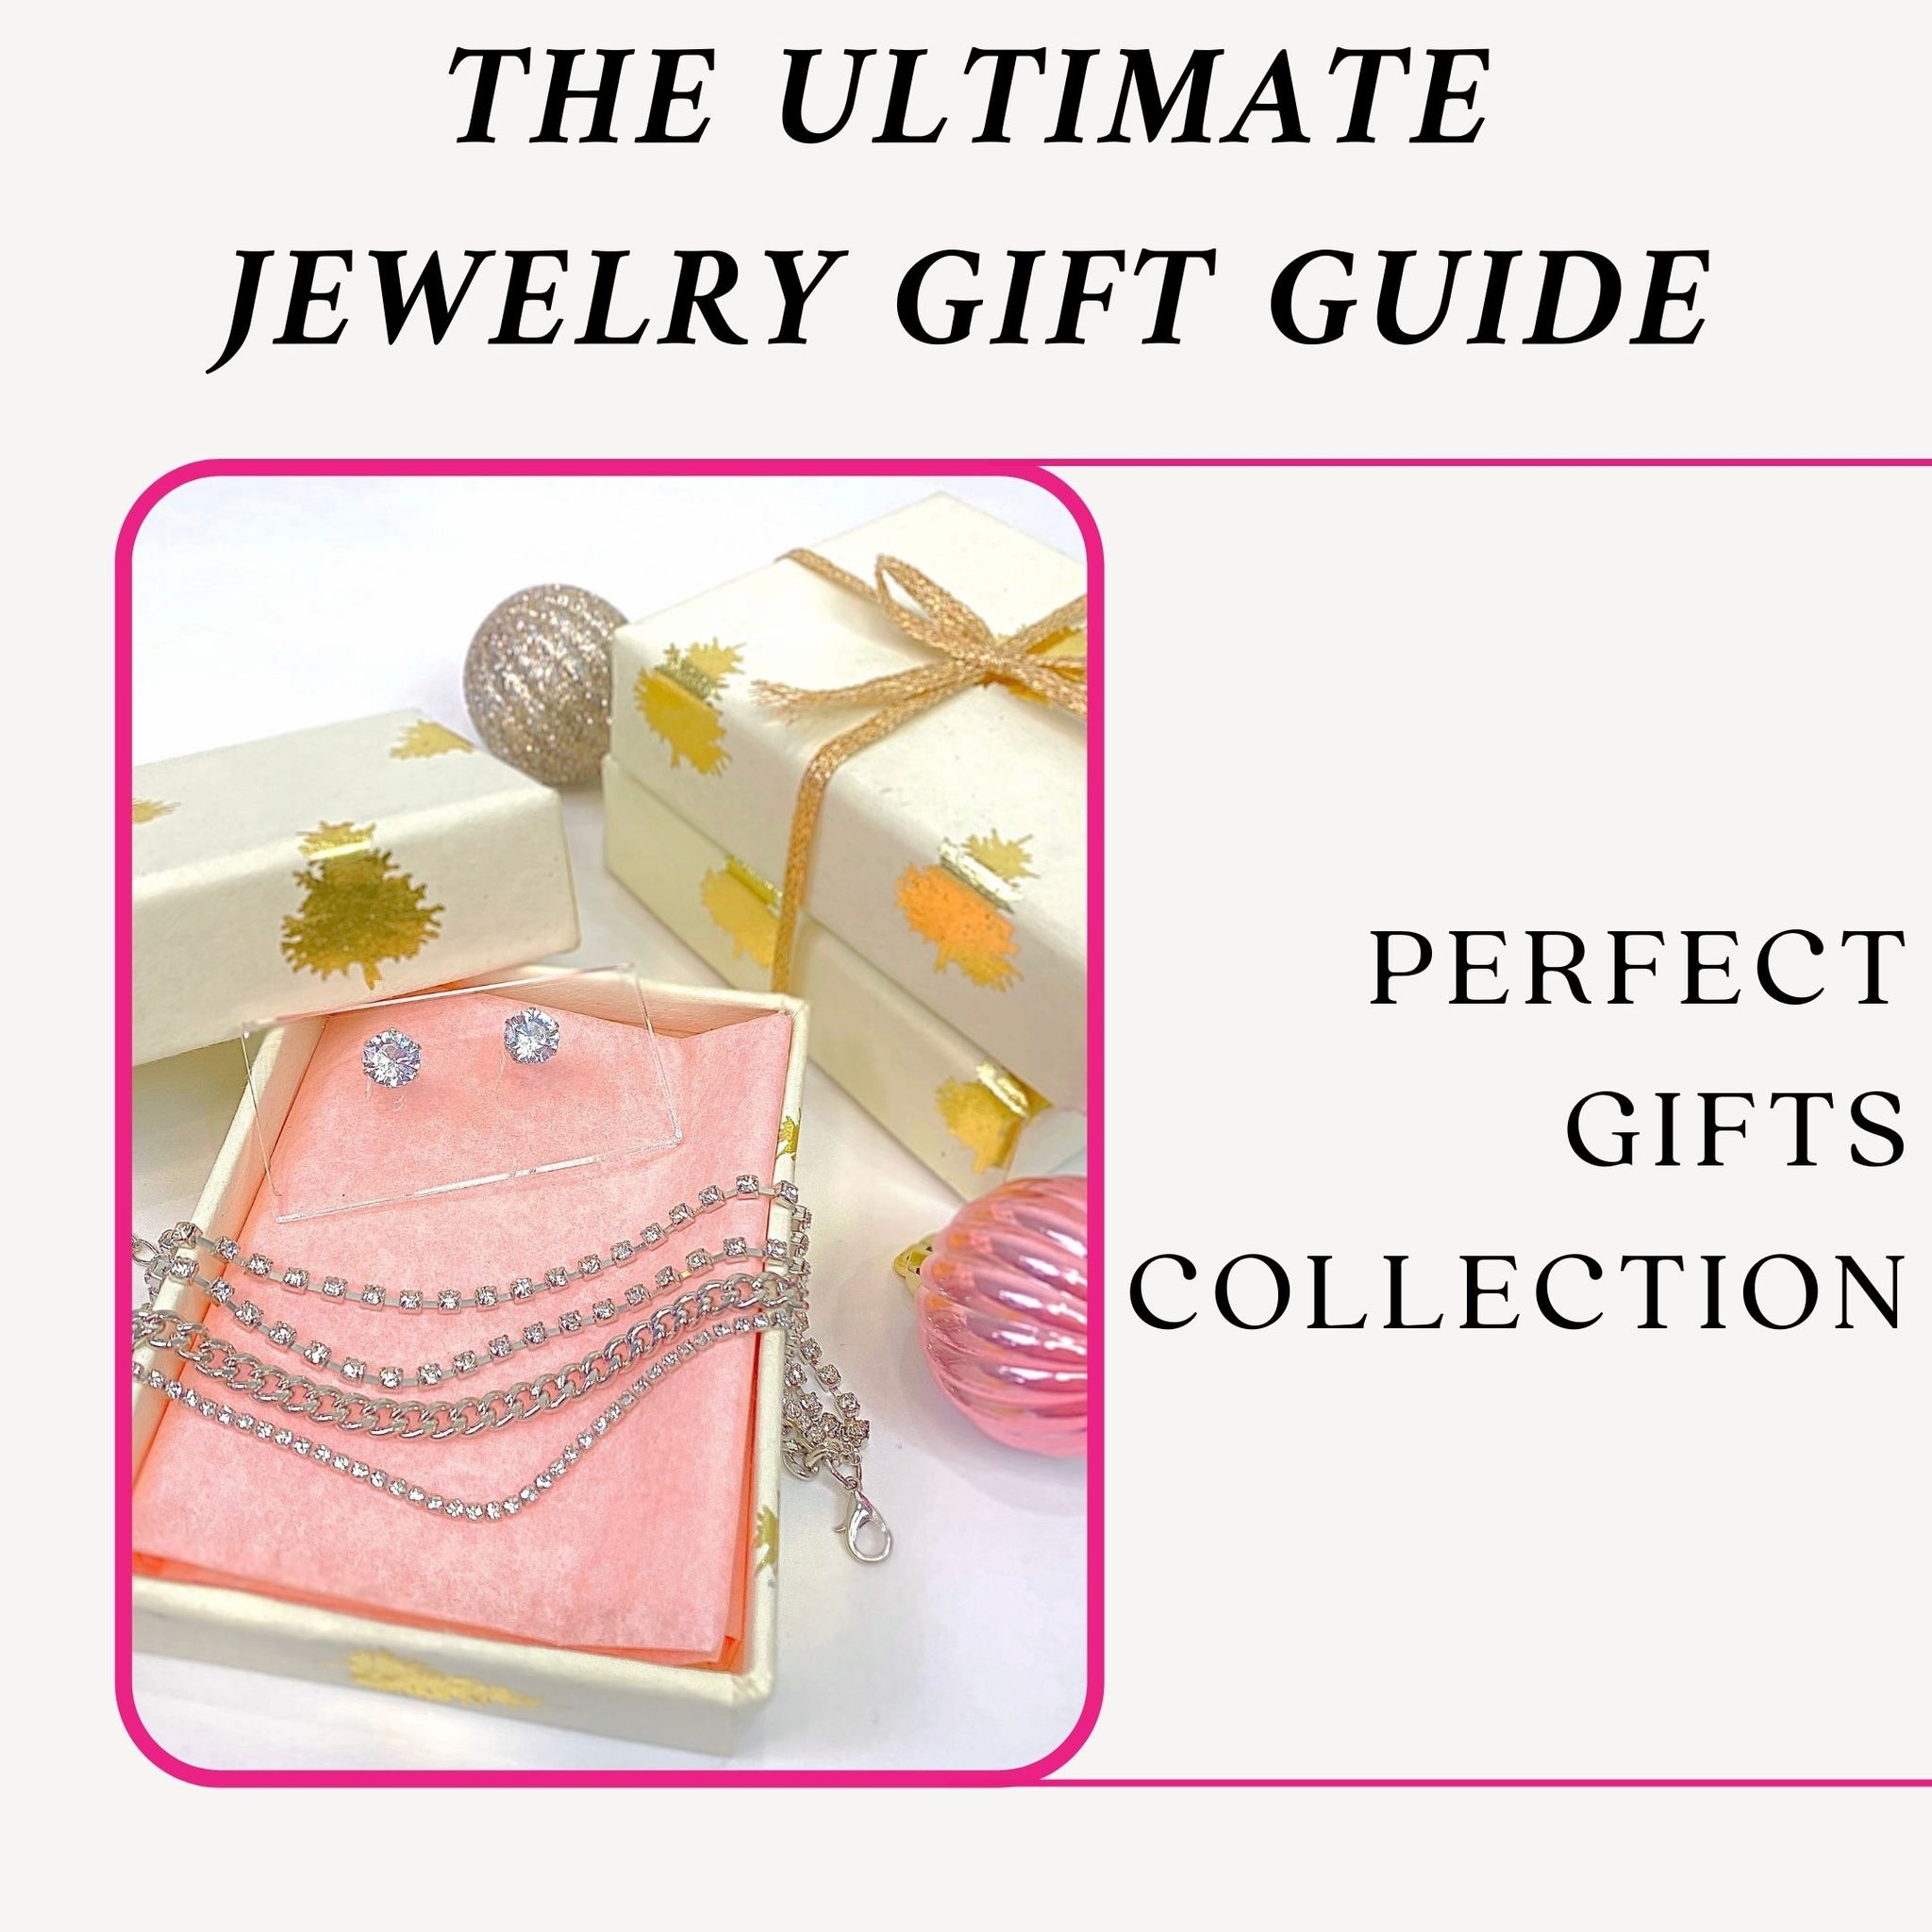 The ULTIMATE Jewelry Gift Guide